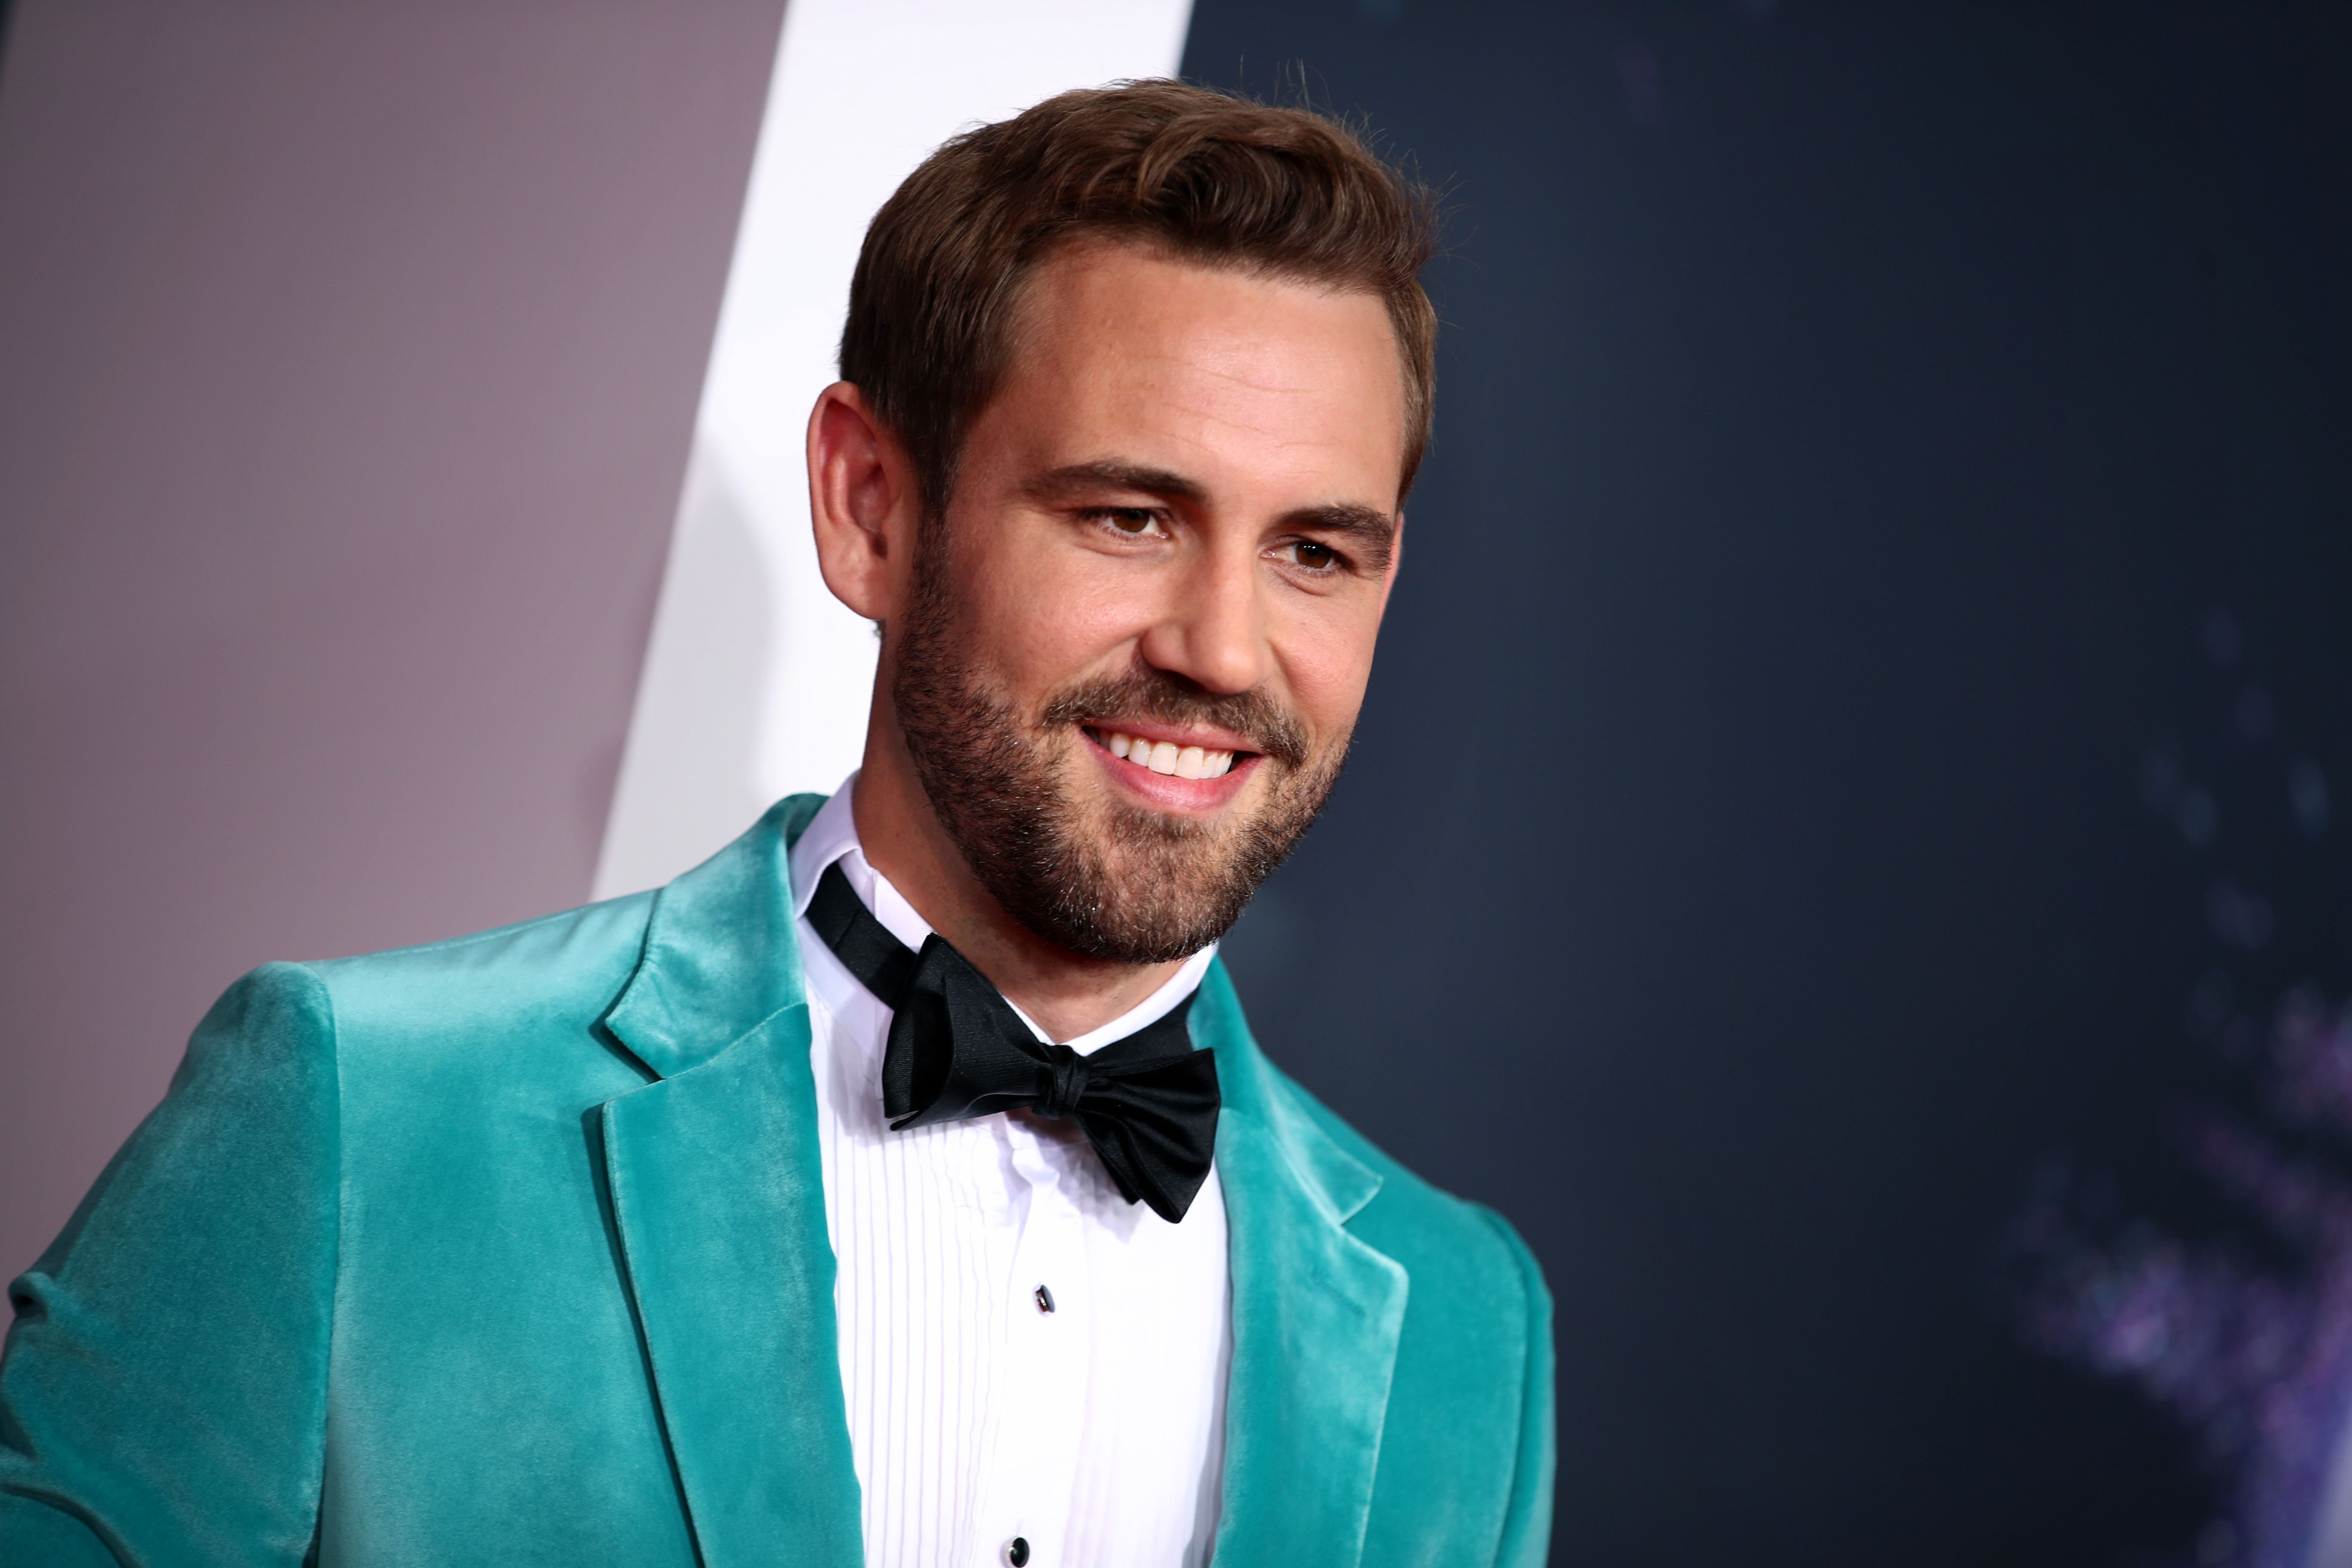 Nick Viall during the 2019 American Music Awards at Microsoft Theater on November 24, 2019 in Los Angeles, California. | Source: Getty Images